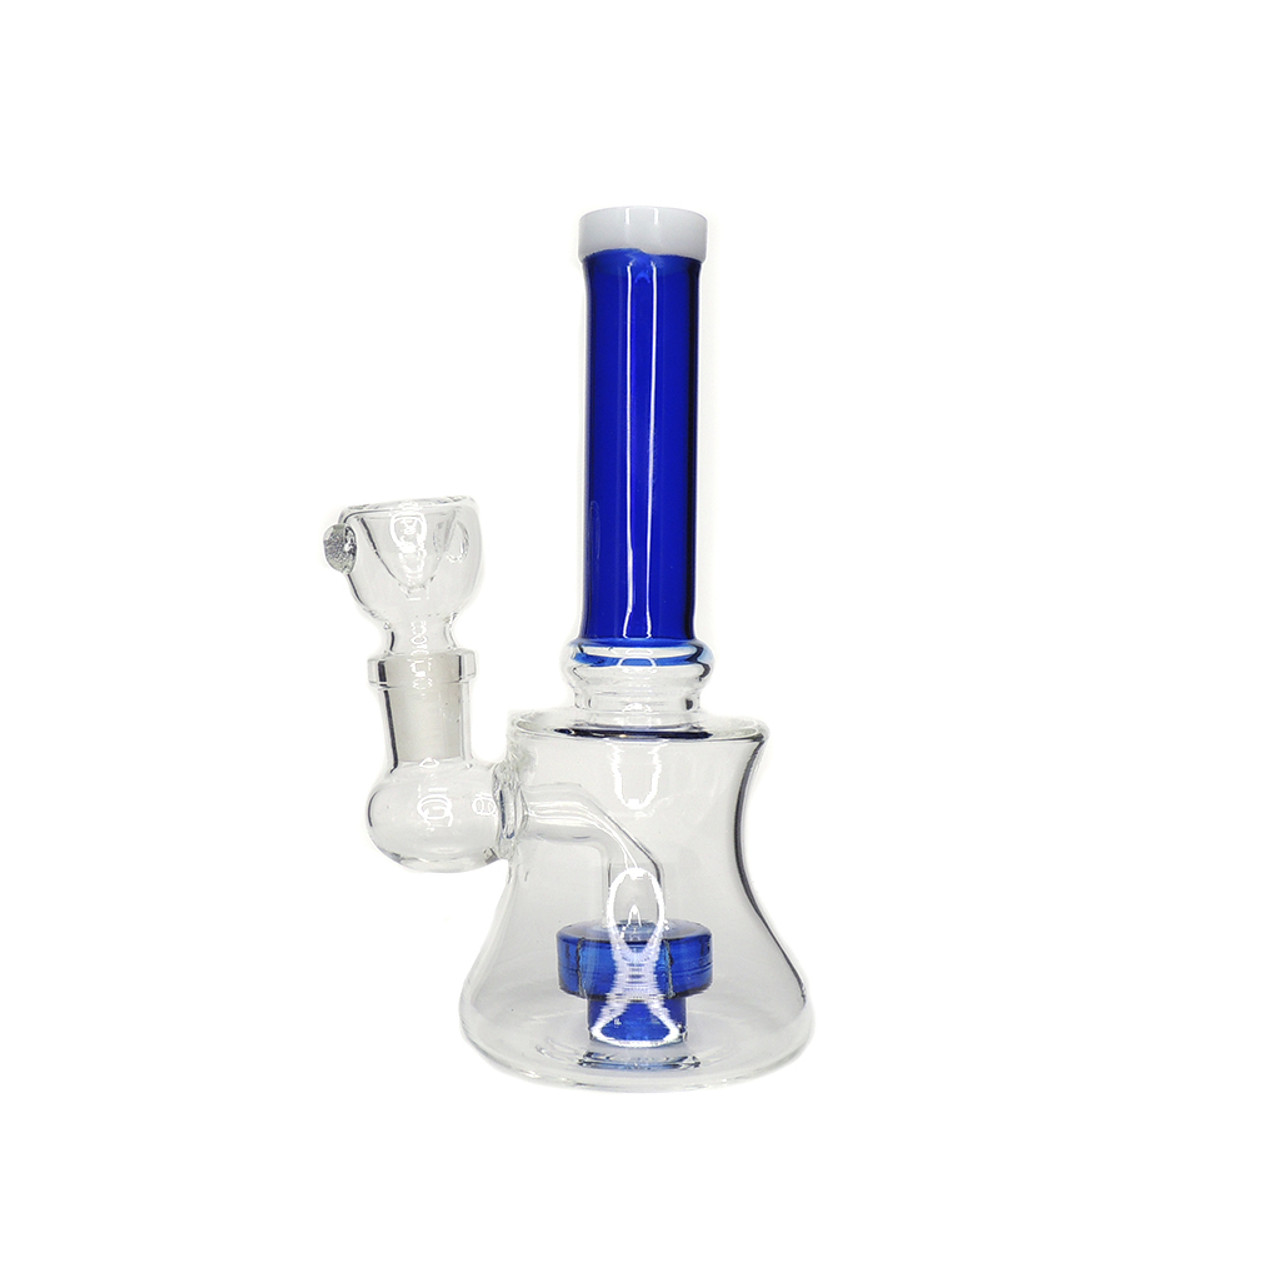 6" Showerhead Water Pipe available in assorted colors; grey, green, blue, and yellow.  A matching colored percolator is featured inside.  Includes an attached downstem and a removable clear bowl.